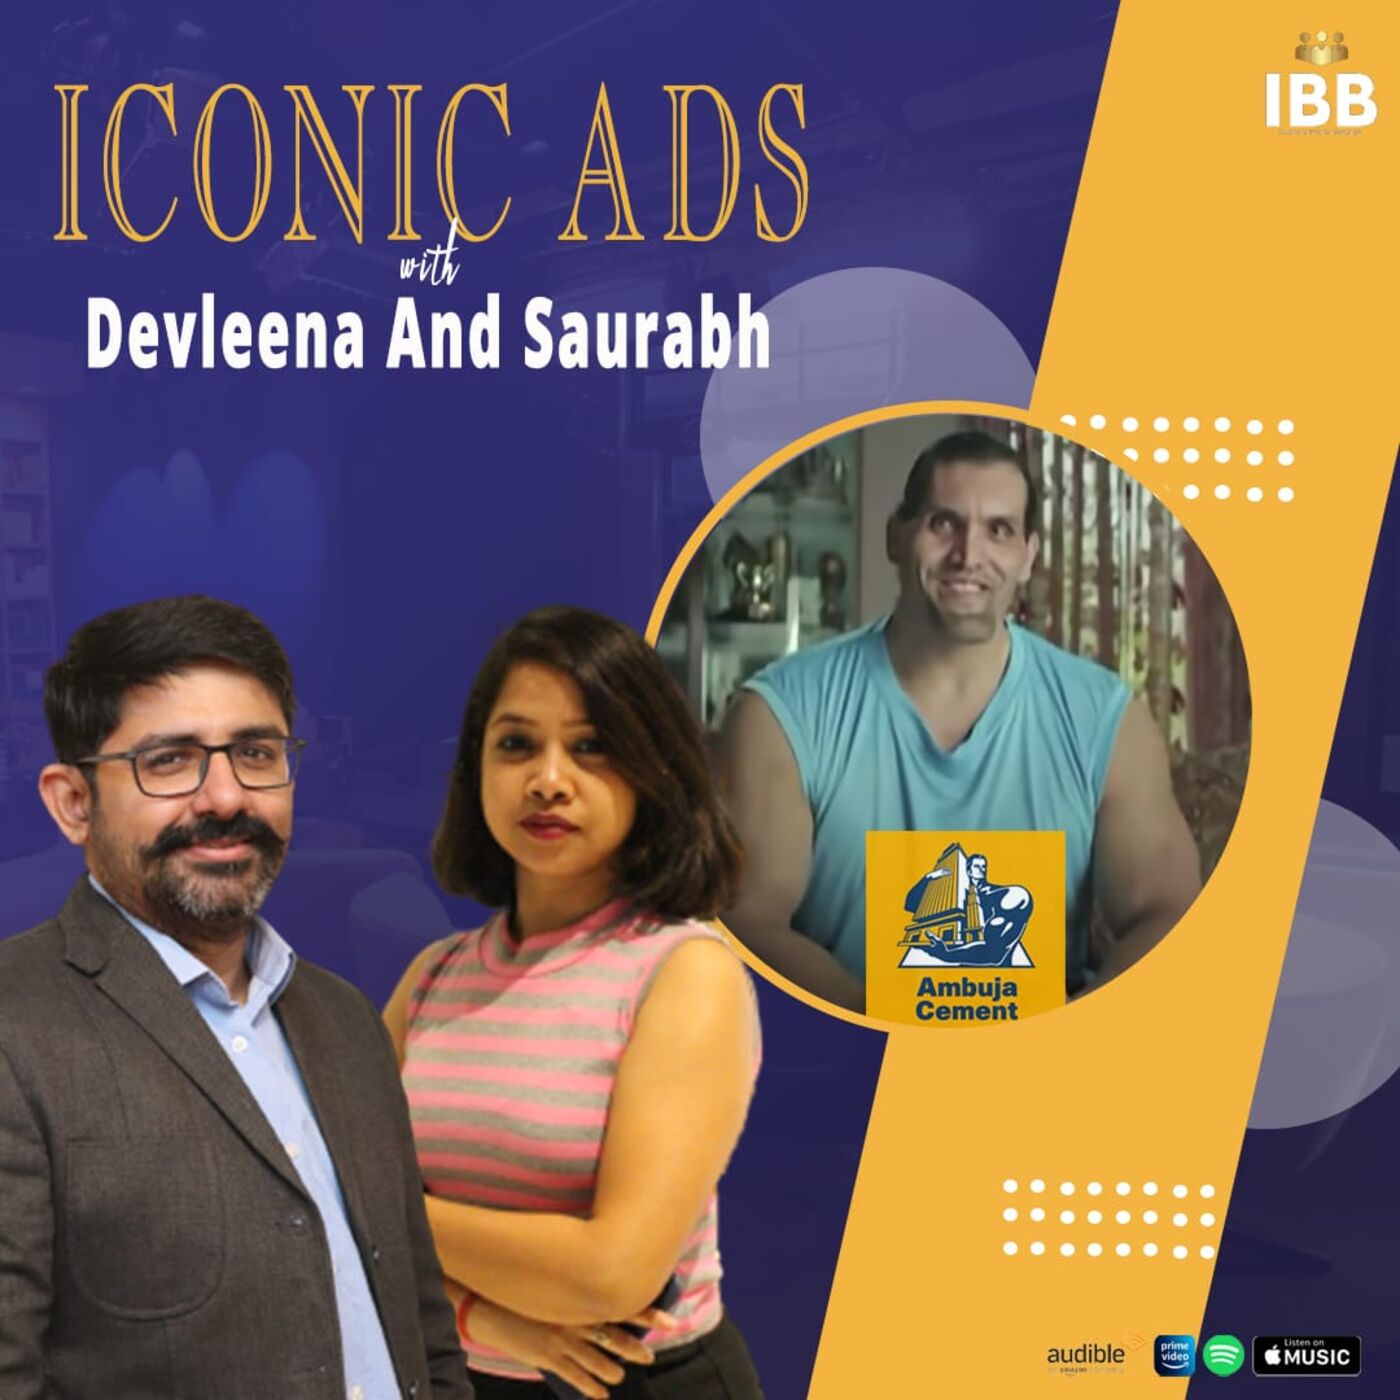 Teaser: Iconic ads with Devleena and Saurabh Ambuja cement Ads